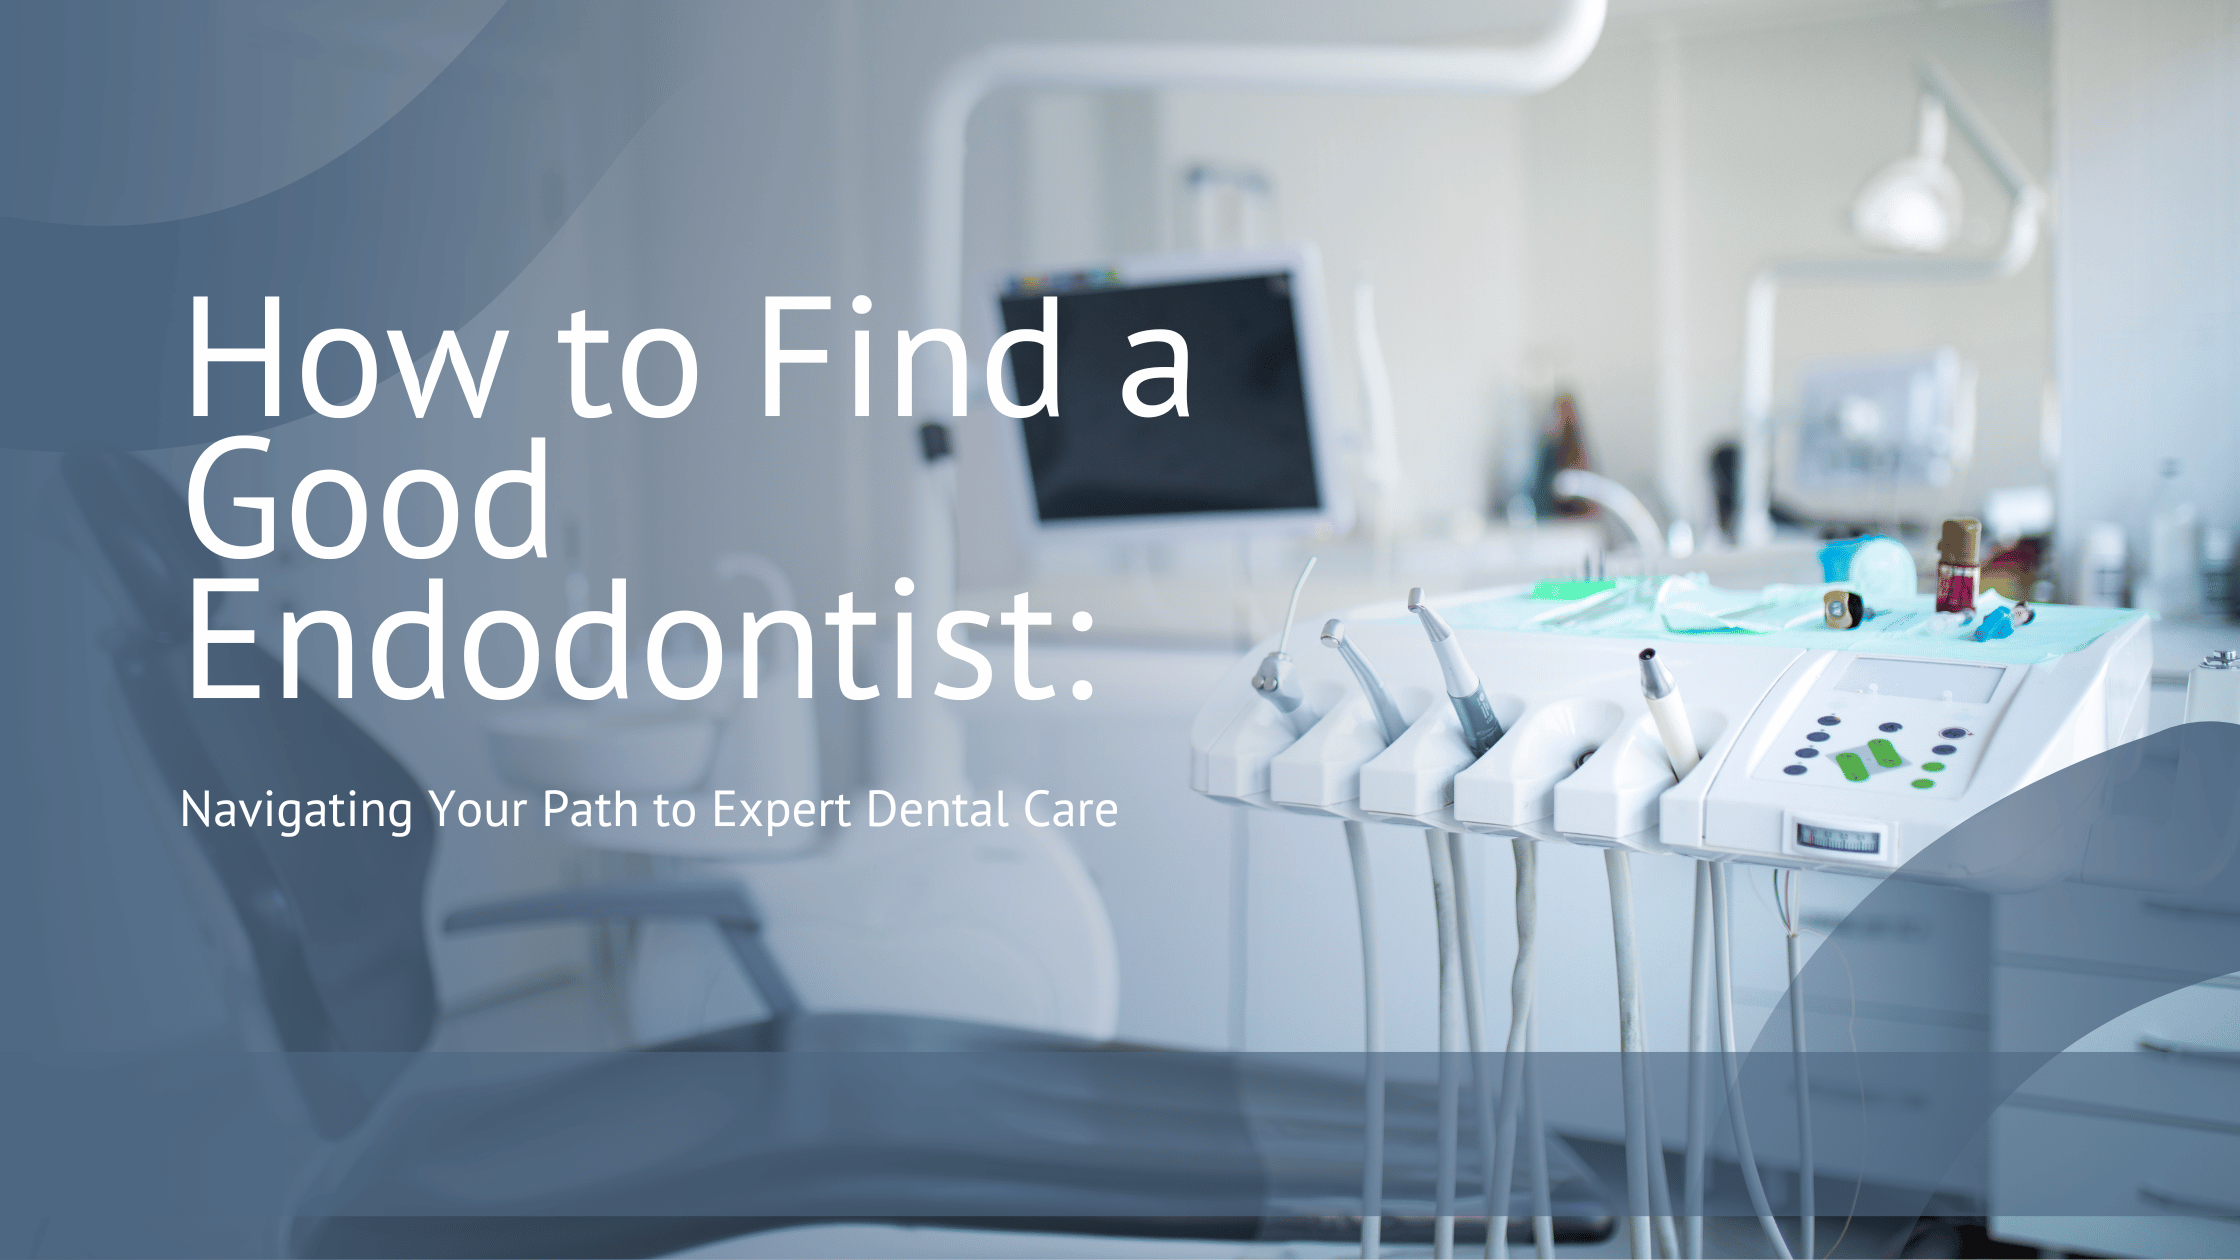 How to Find a Good Endodontist: